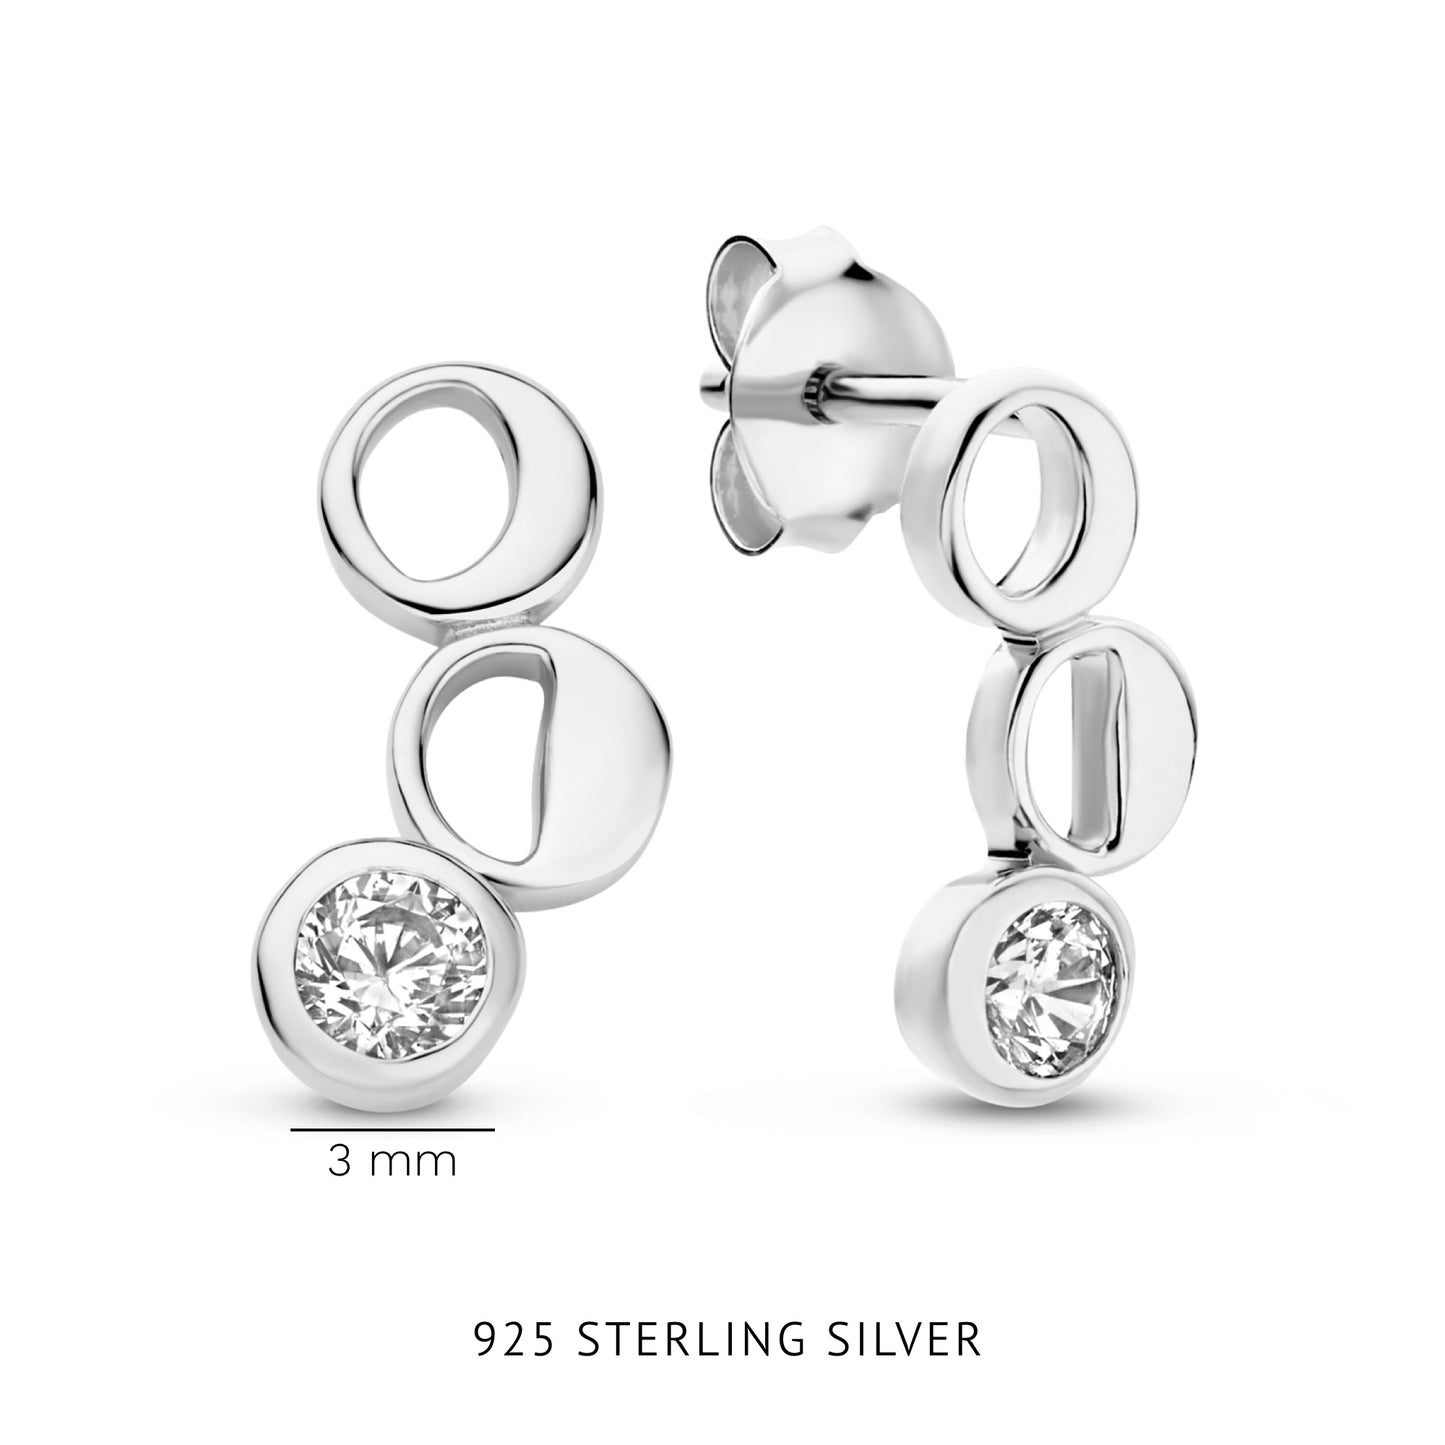 Luna 925 sterling silver ear studs with white zirconia stone